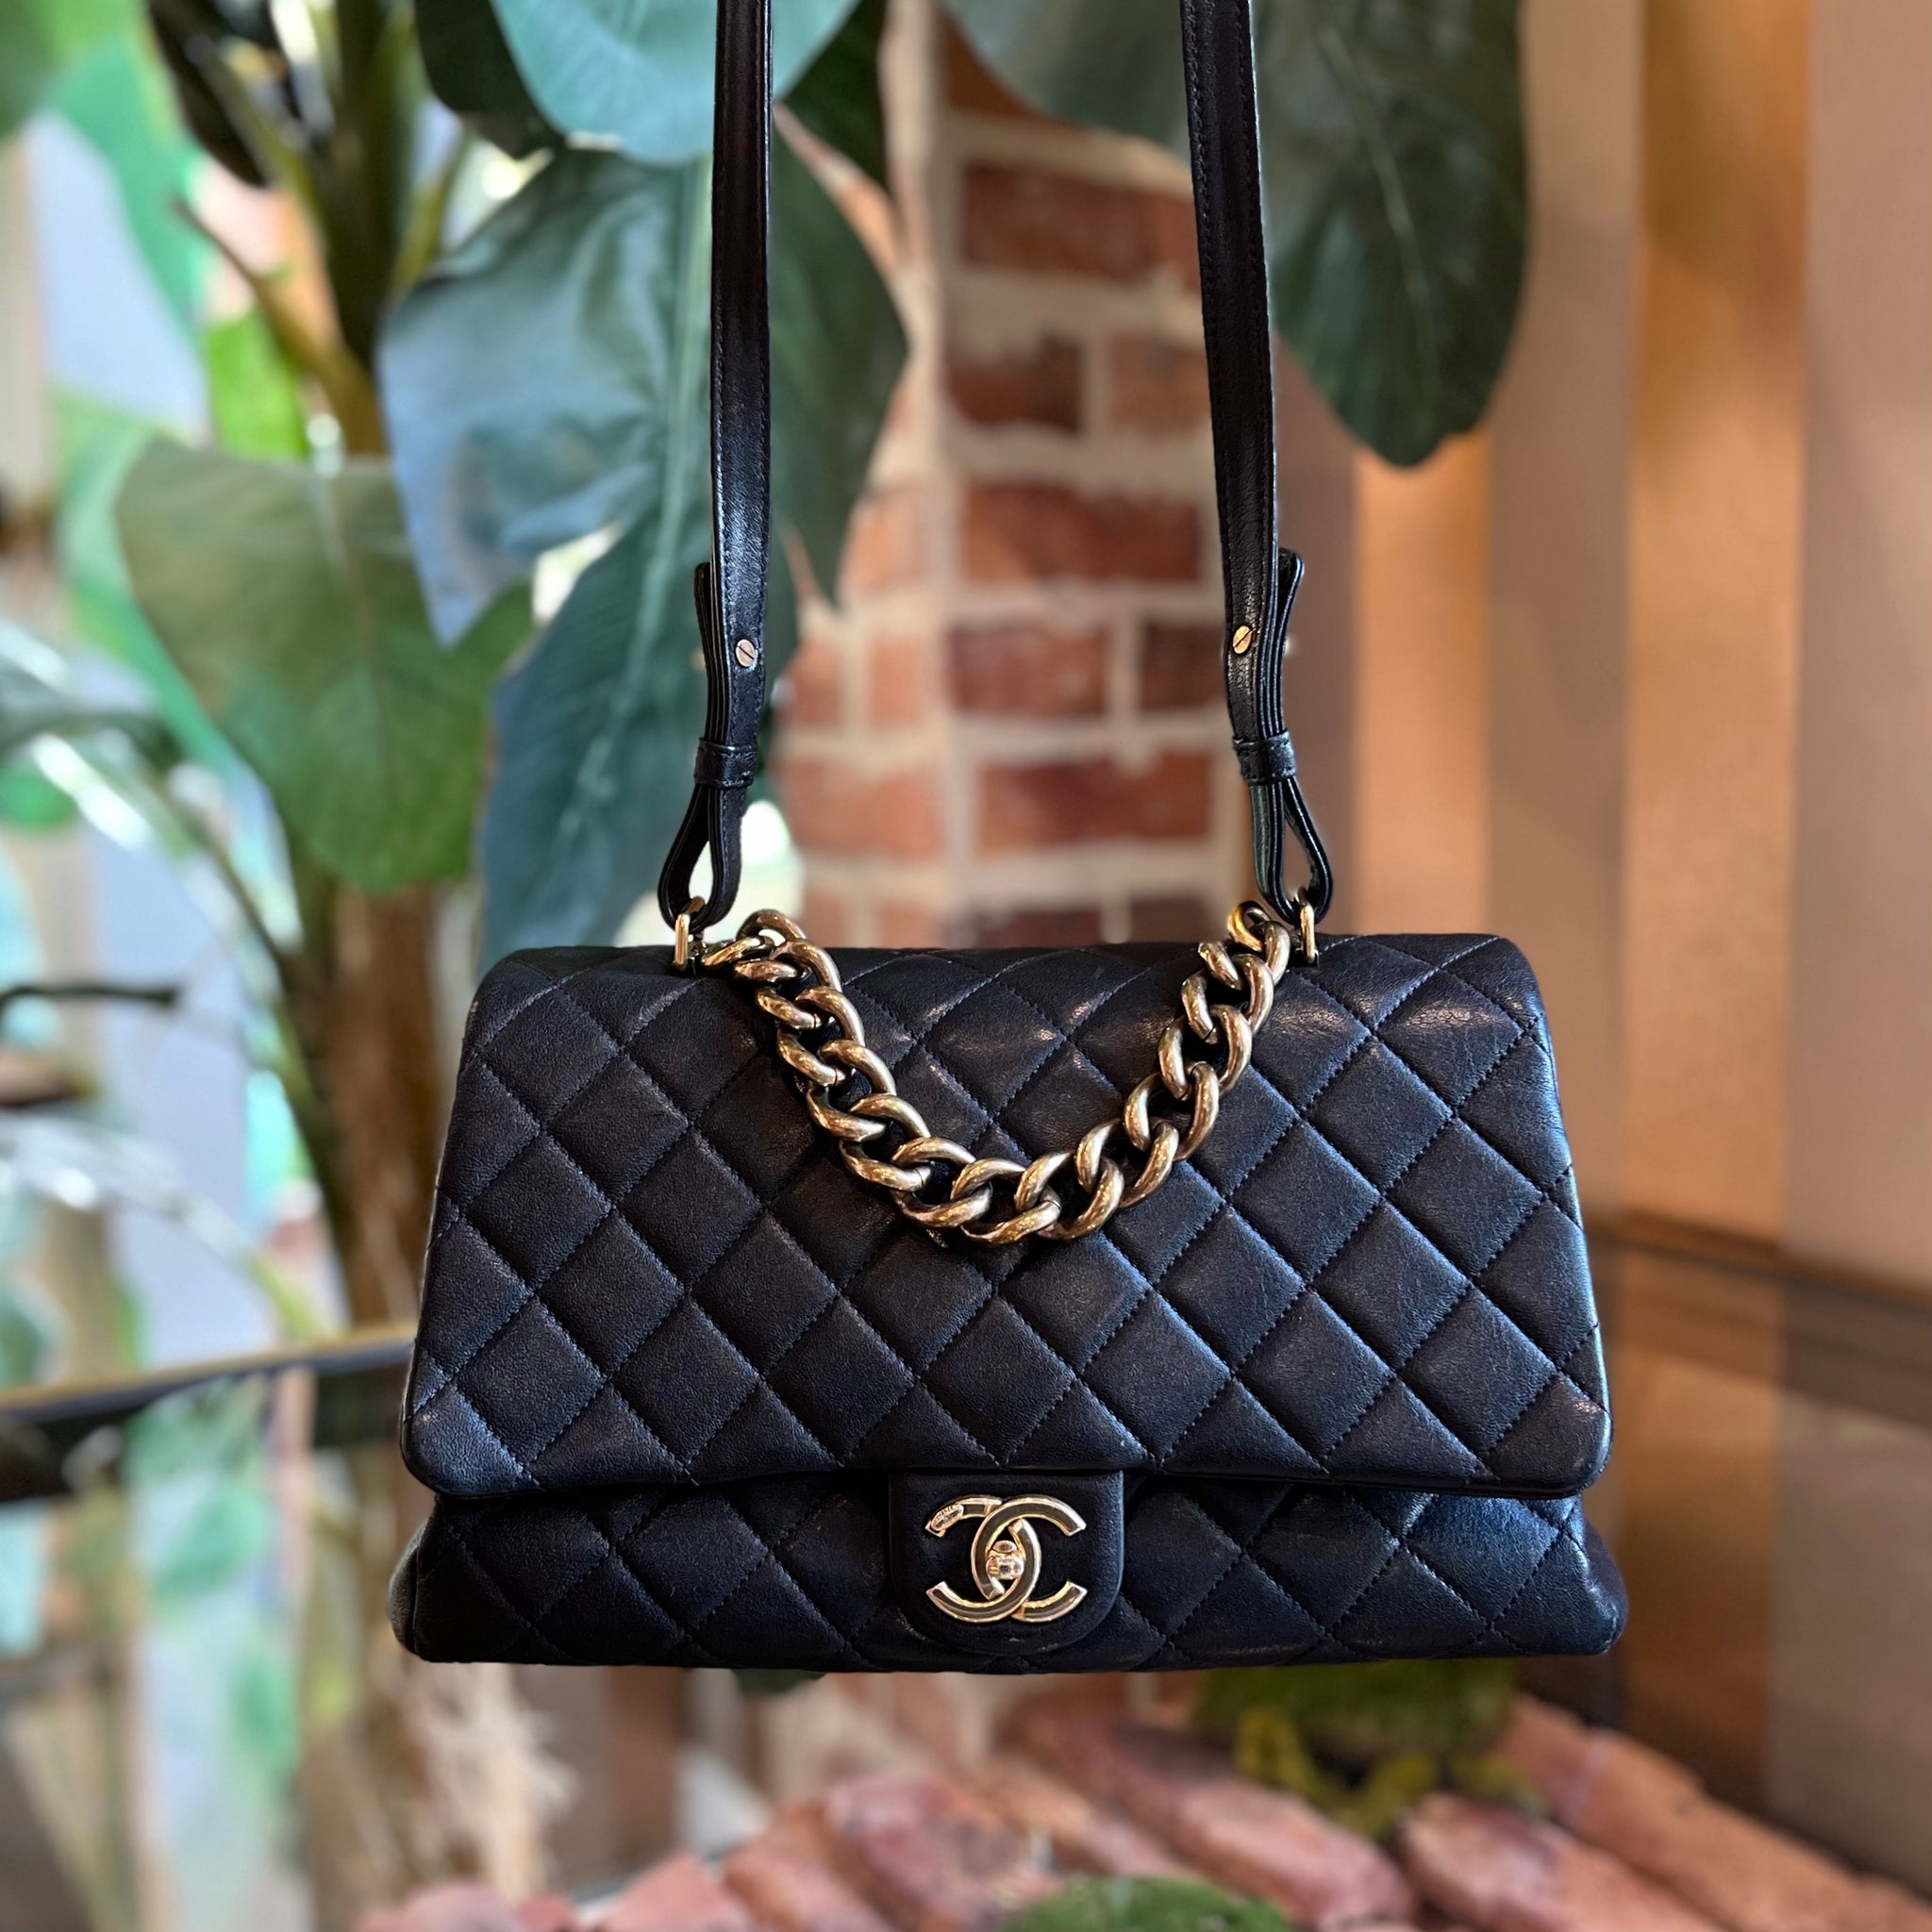 chanel black quilted leather bags handbags